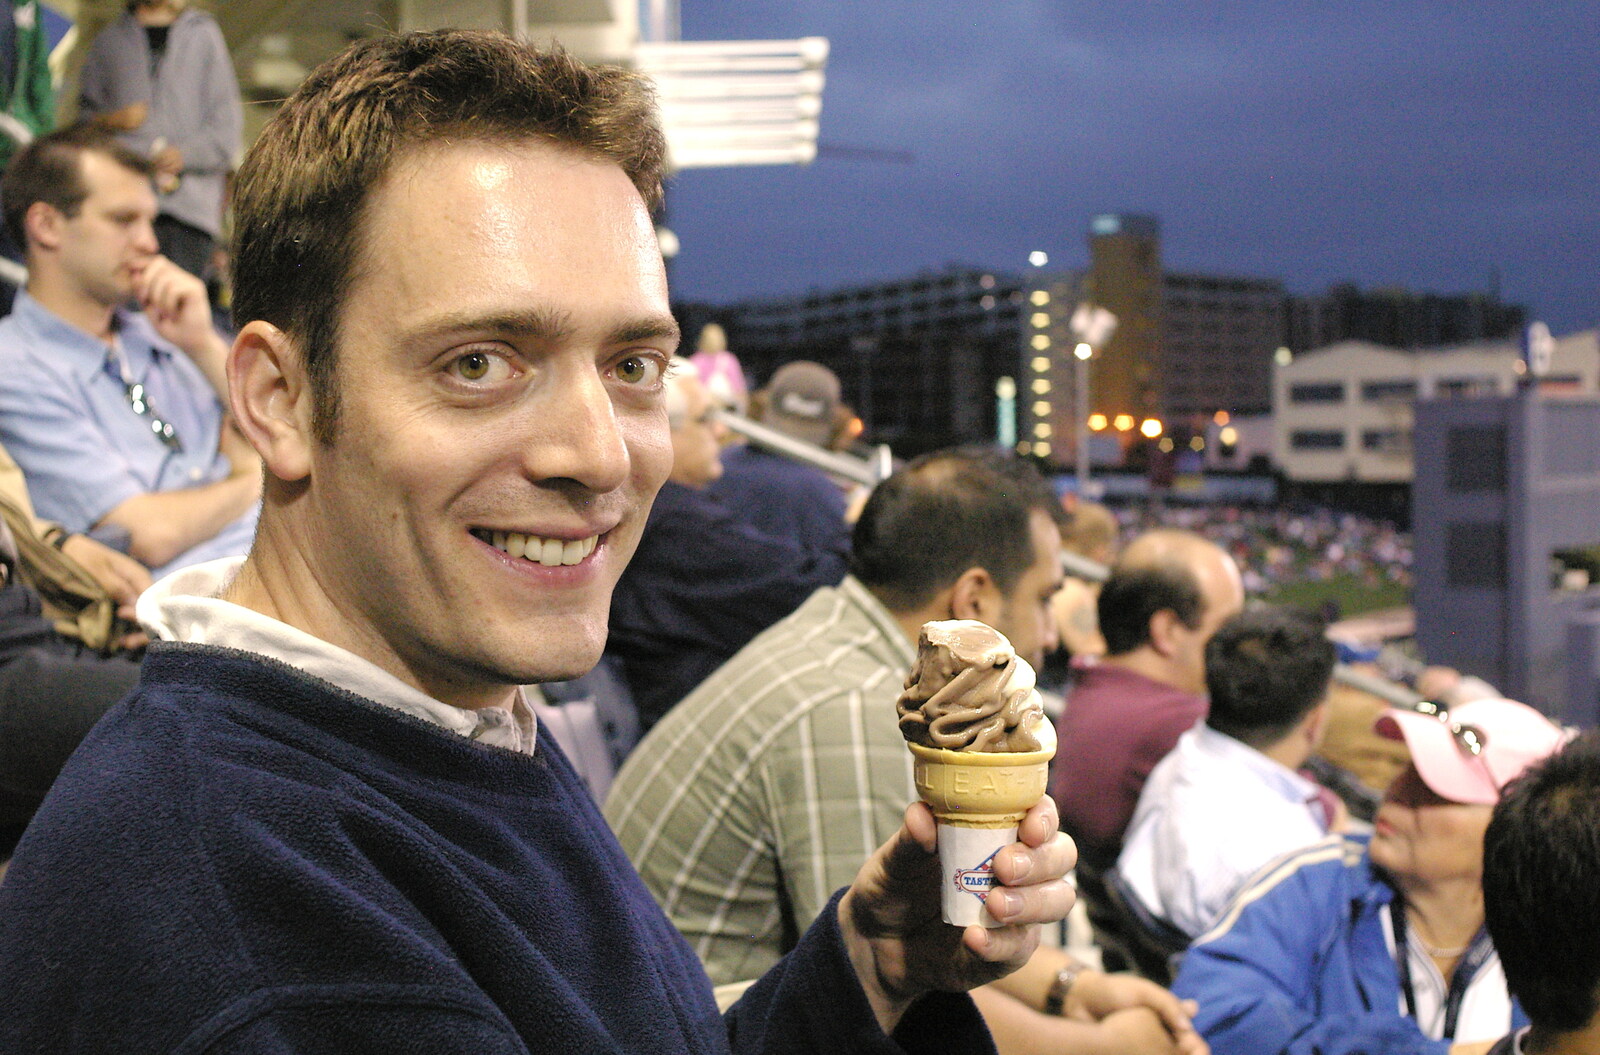 Stef holds up his ice-cream tub from The Padres at Petco Park: a Baseball Game, San Diego, California - 31st May 2005